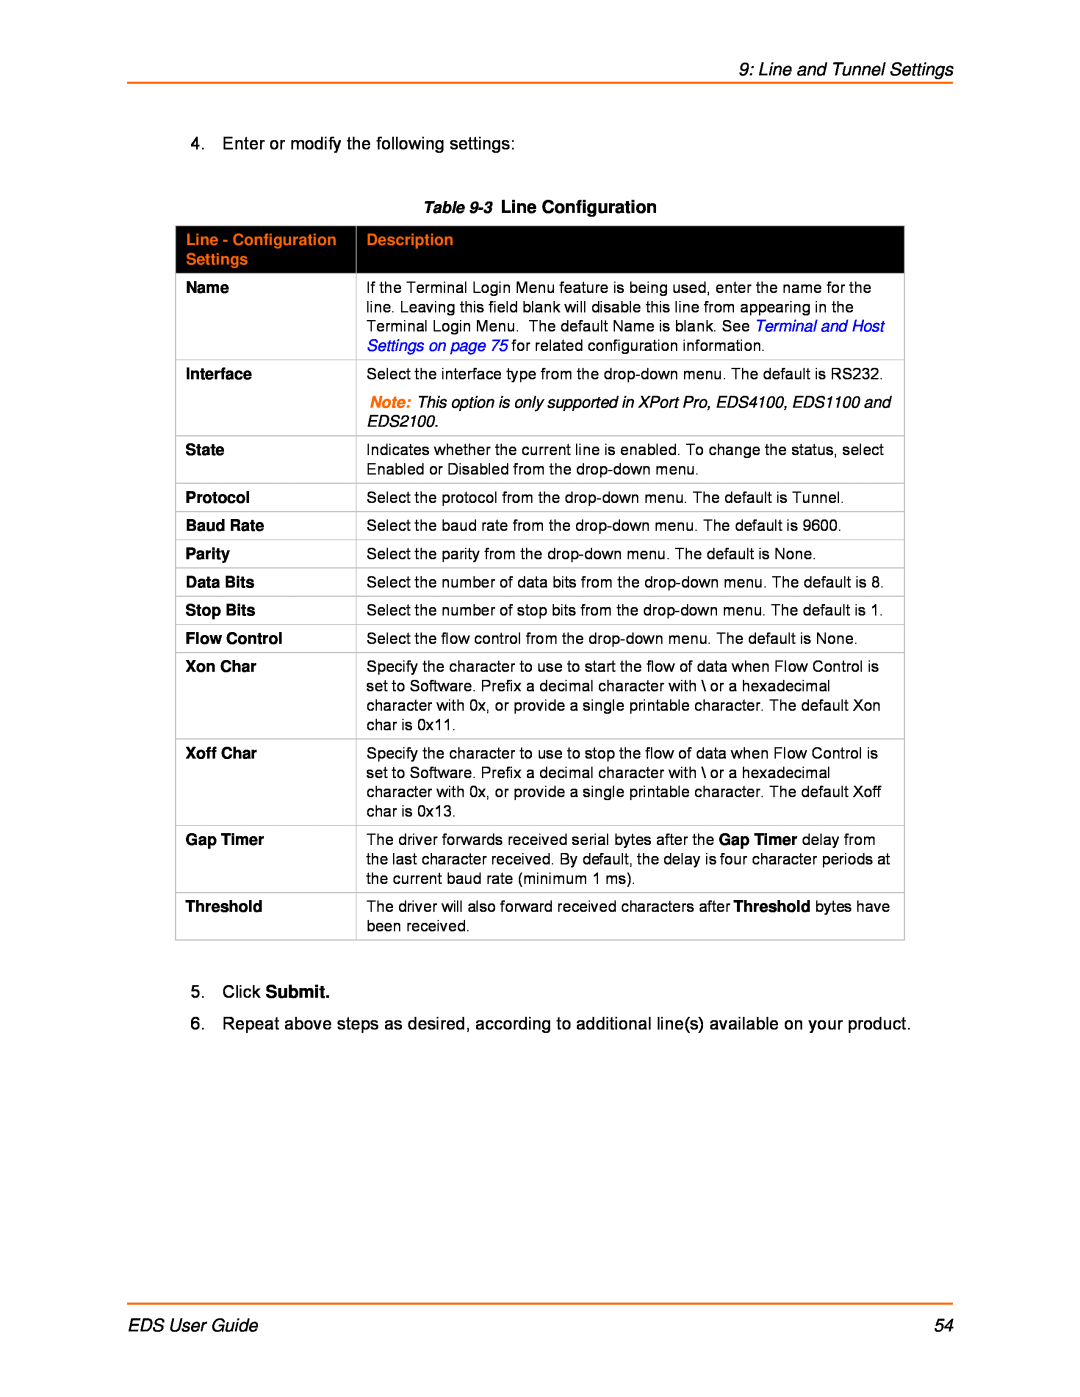 Lantronix EDS32PR manual Line and Tunnel Settings, 3 Line Configuration, Click Submit, EDS User Guide, Line - Configuration 